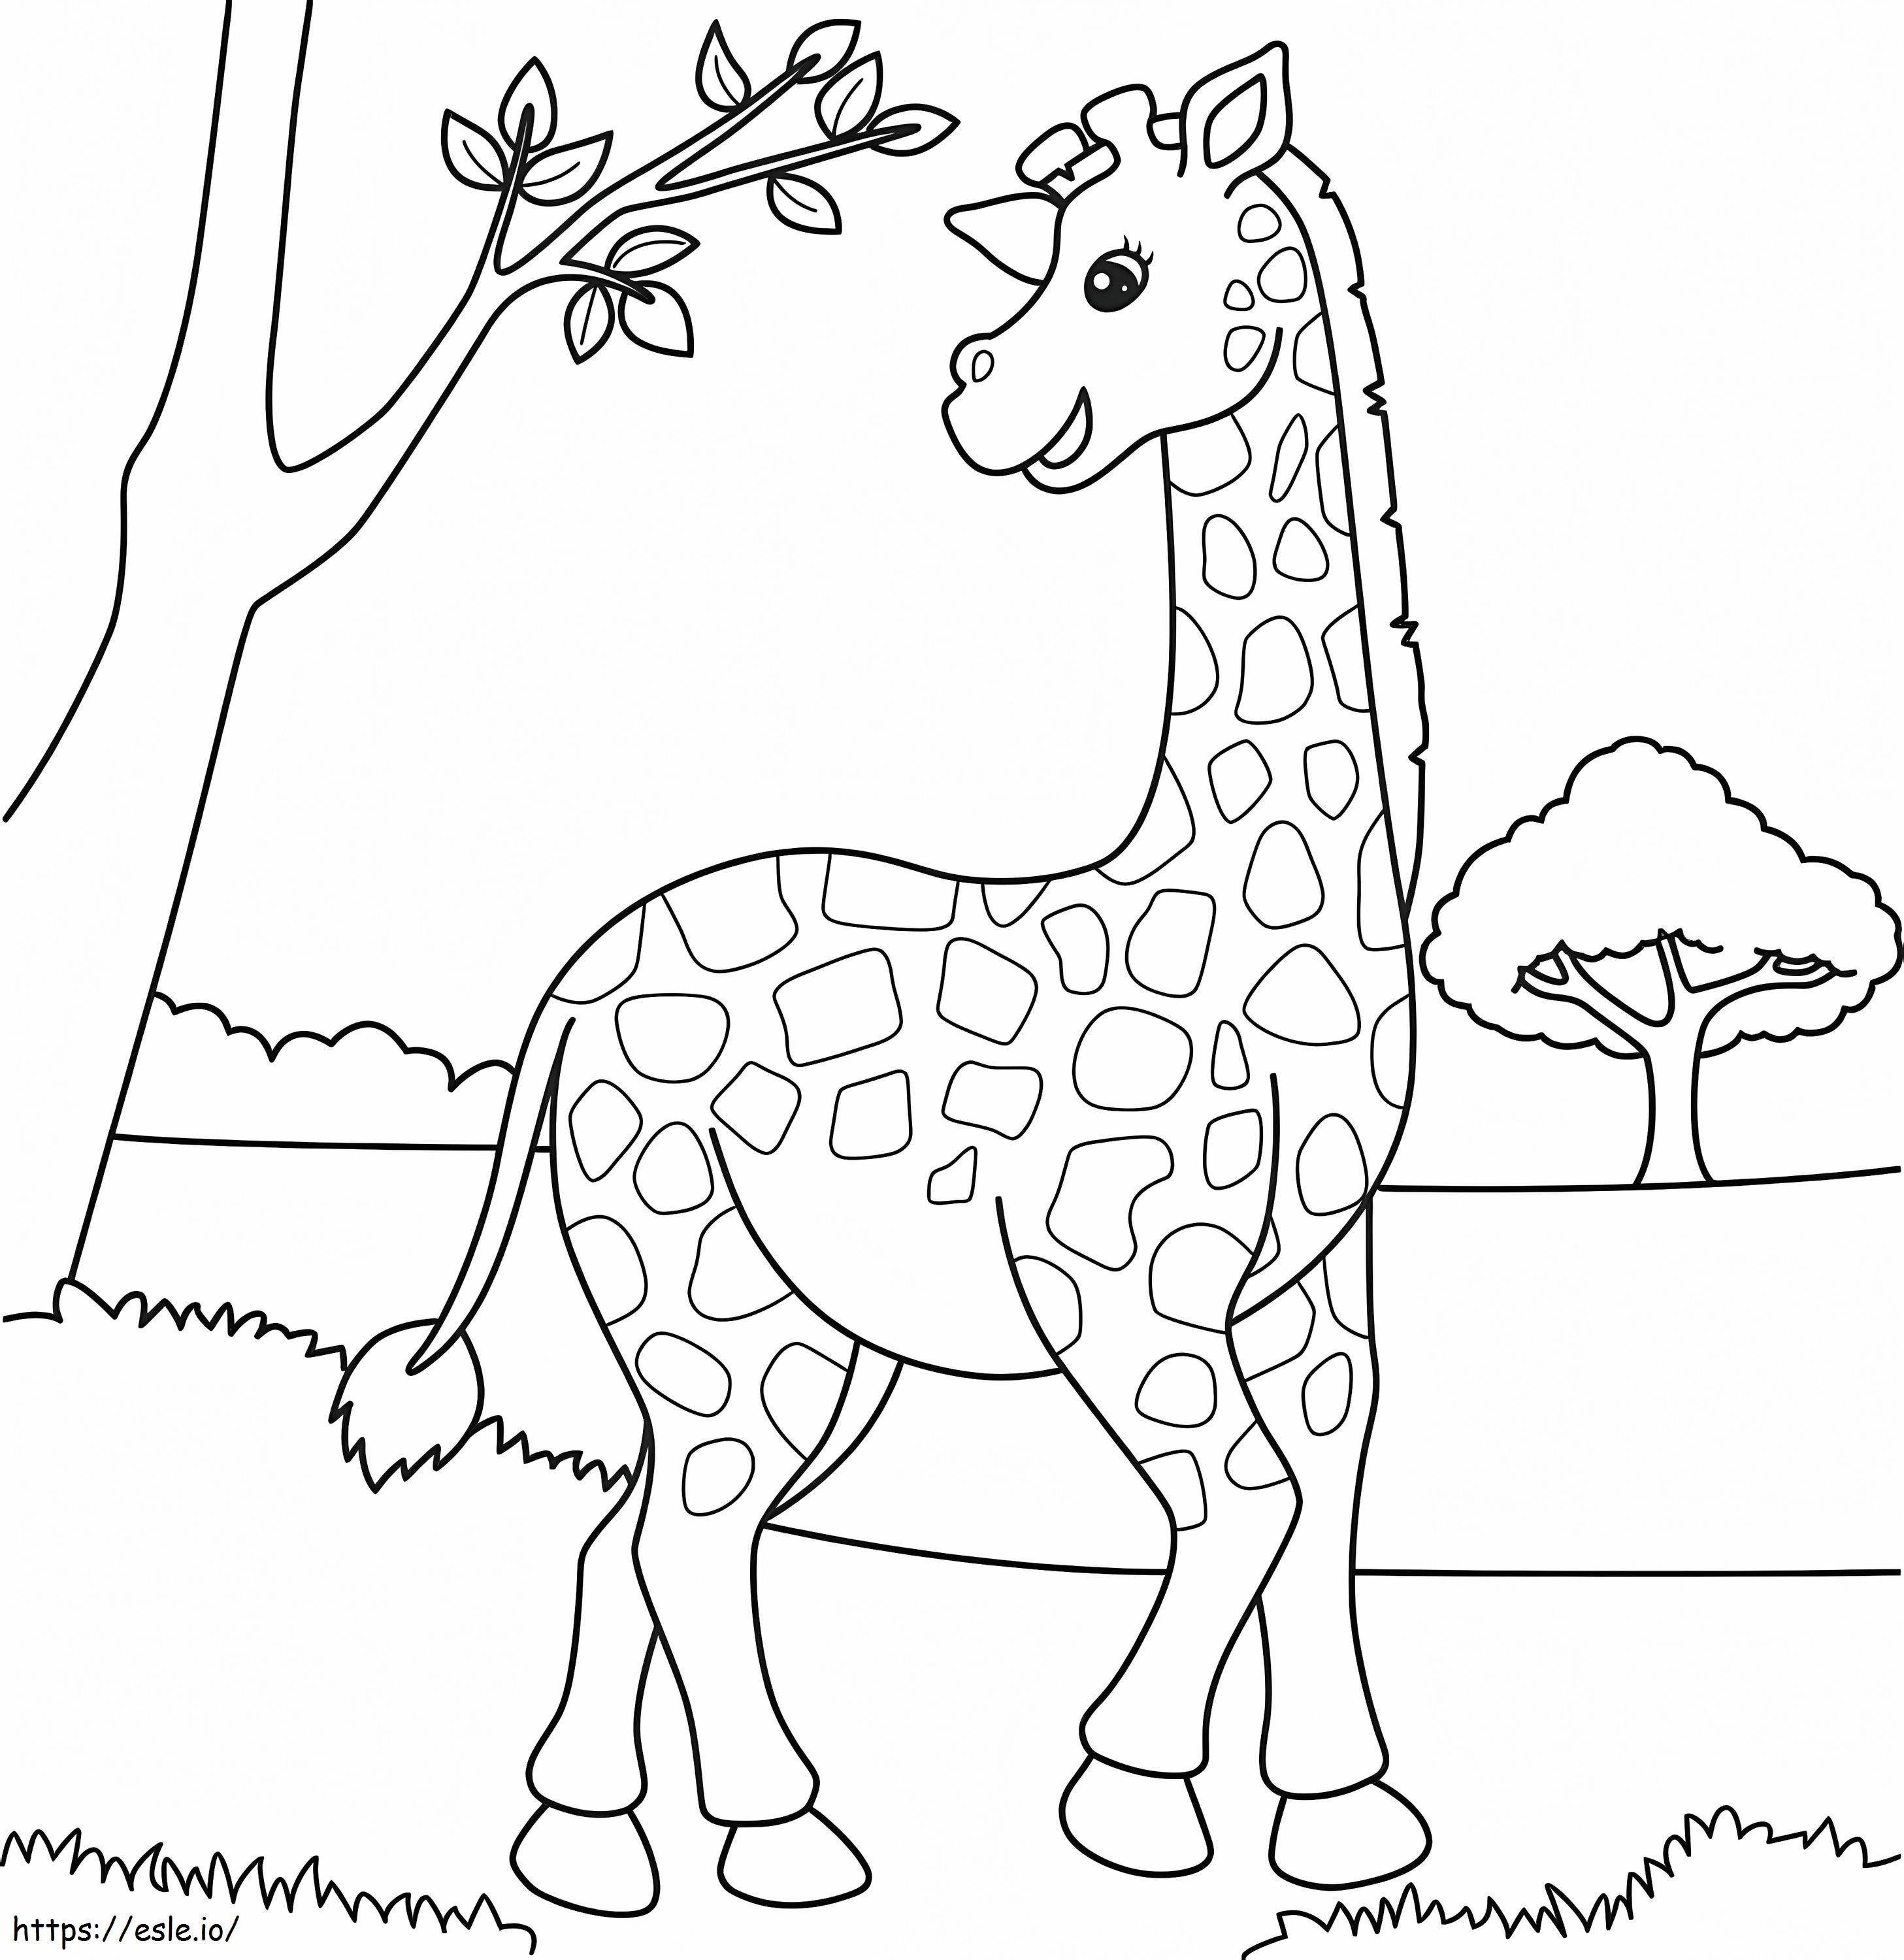 Giraffe Free Images coloring page